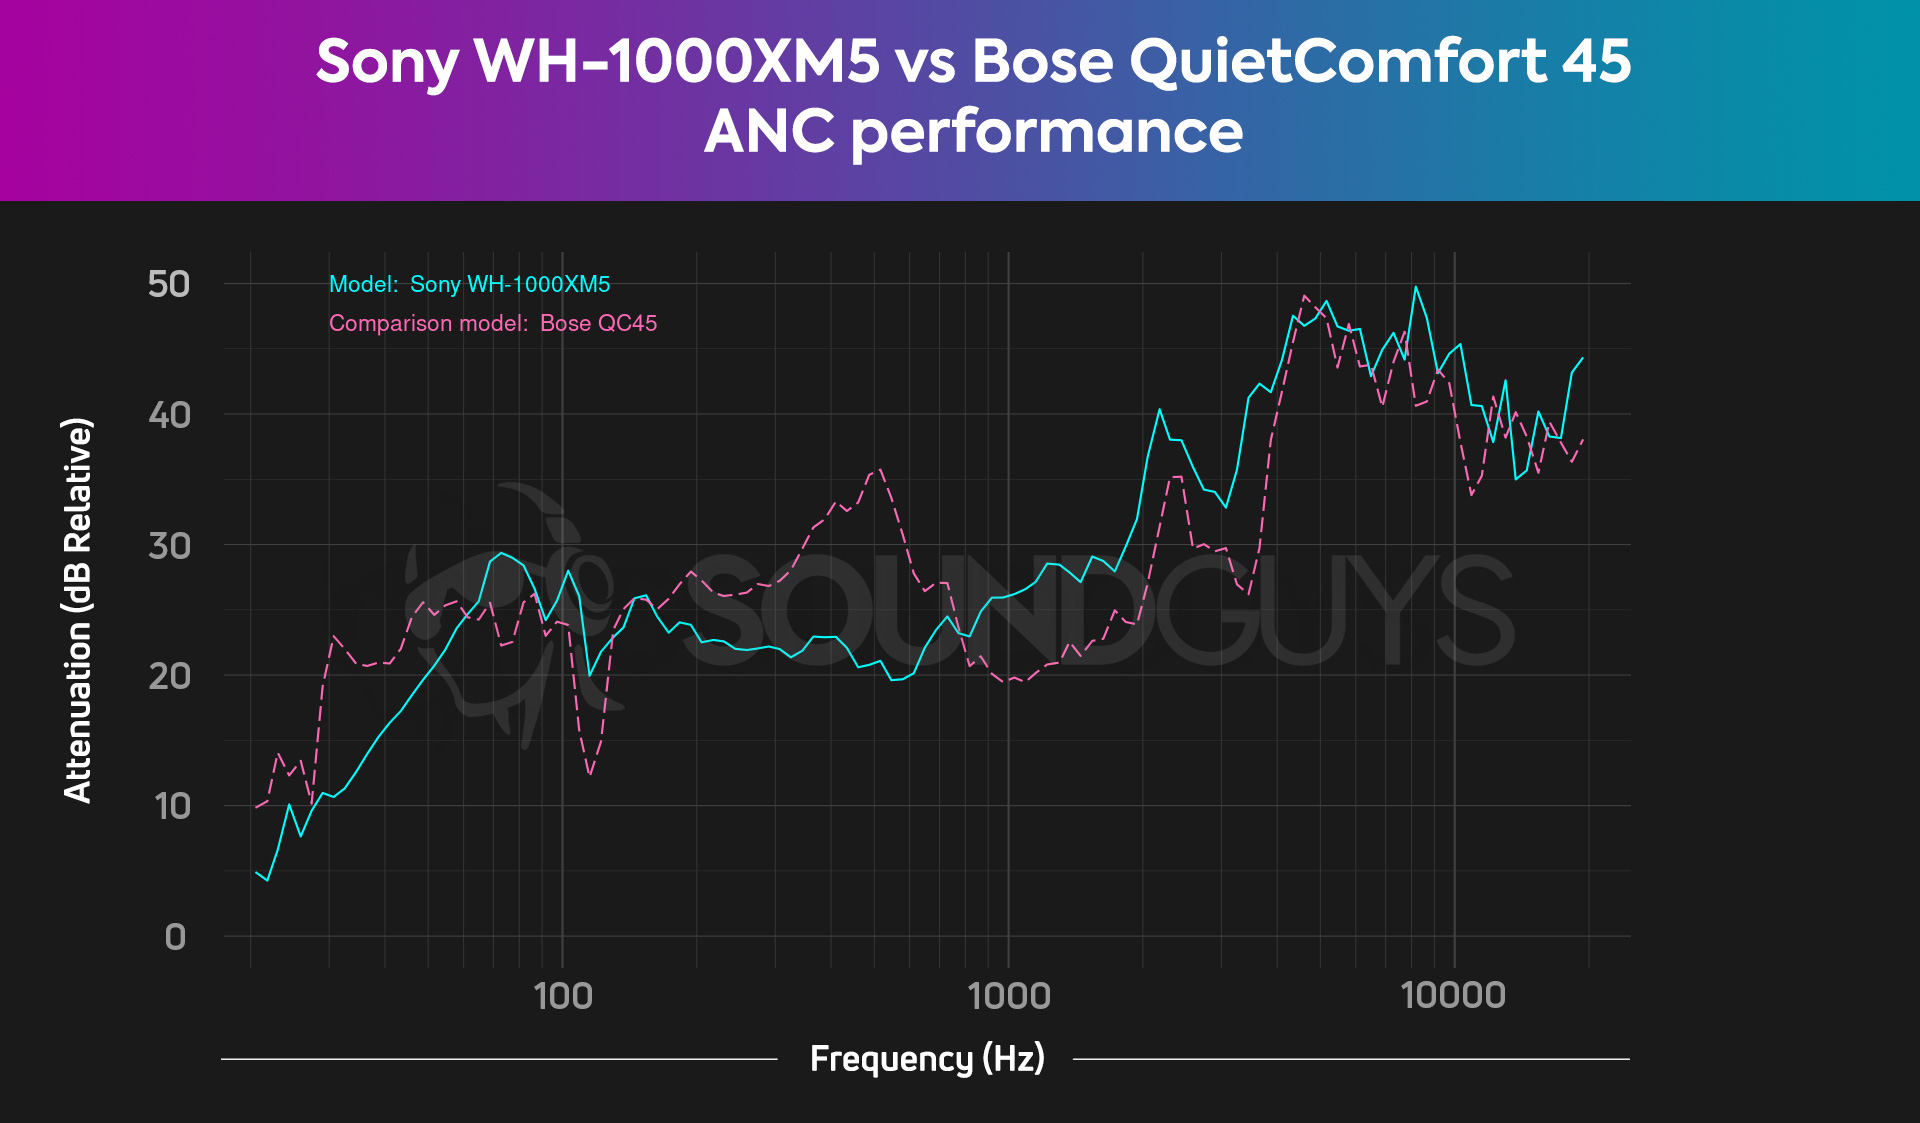 A chart compares the Sony WH-1000XM5 and Bose QuietComfort 45 ANC performances to one another, revealing that the two headsets are very close.